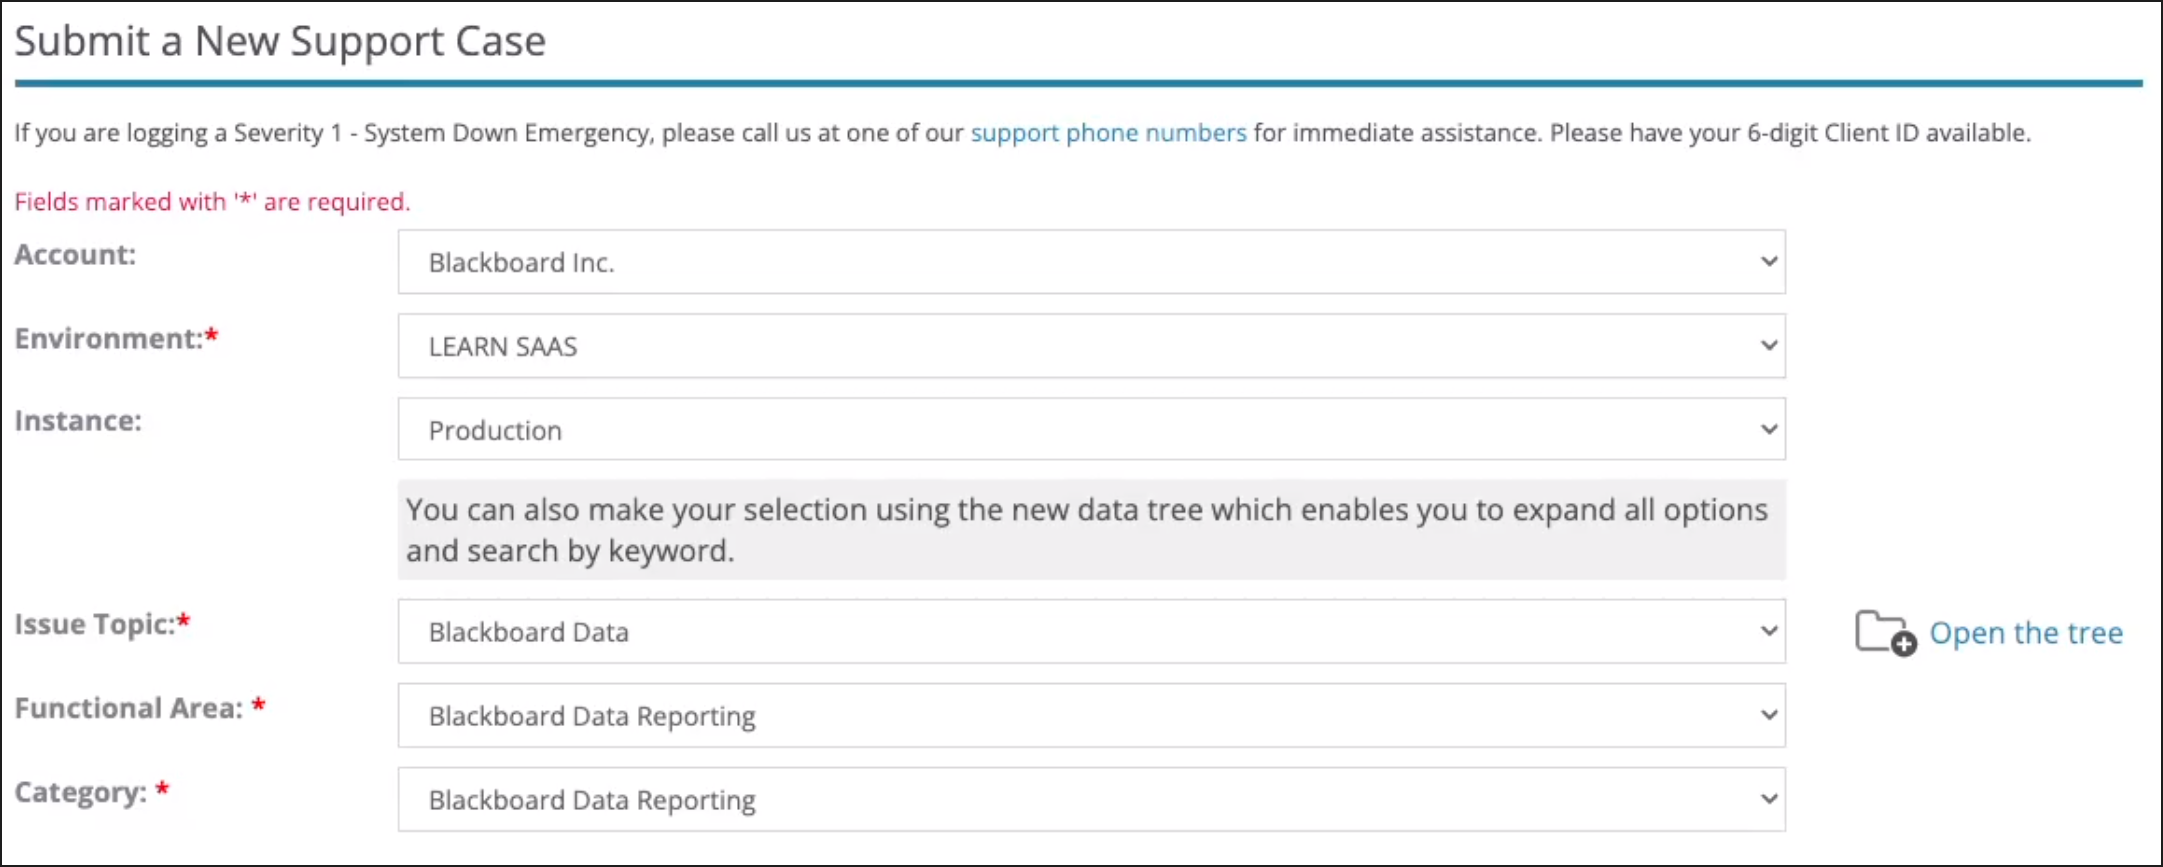 Submit a new support case. Account Blackboard Inc. Environment LEARN SAS. Instance Production. Issue topic Blackboard Data. Functional Area Blackboard Data Reporting. Category Blackboard Data Reporting 